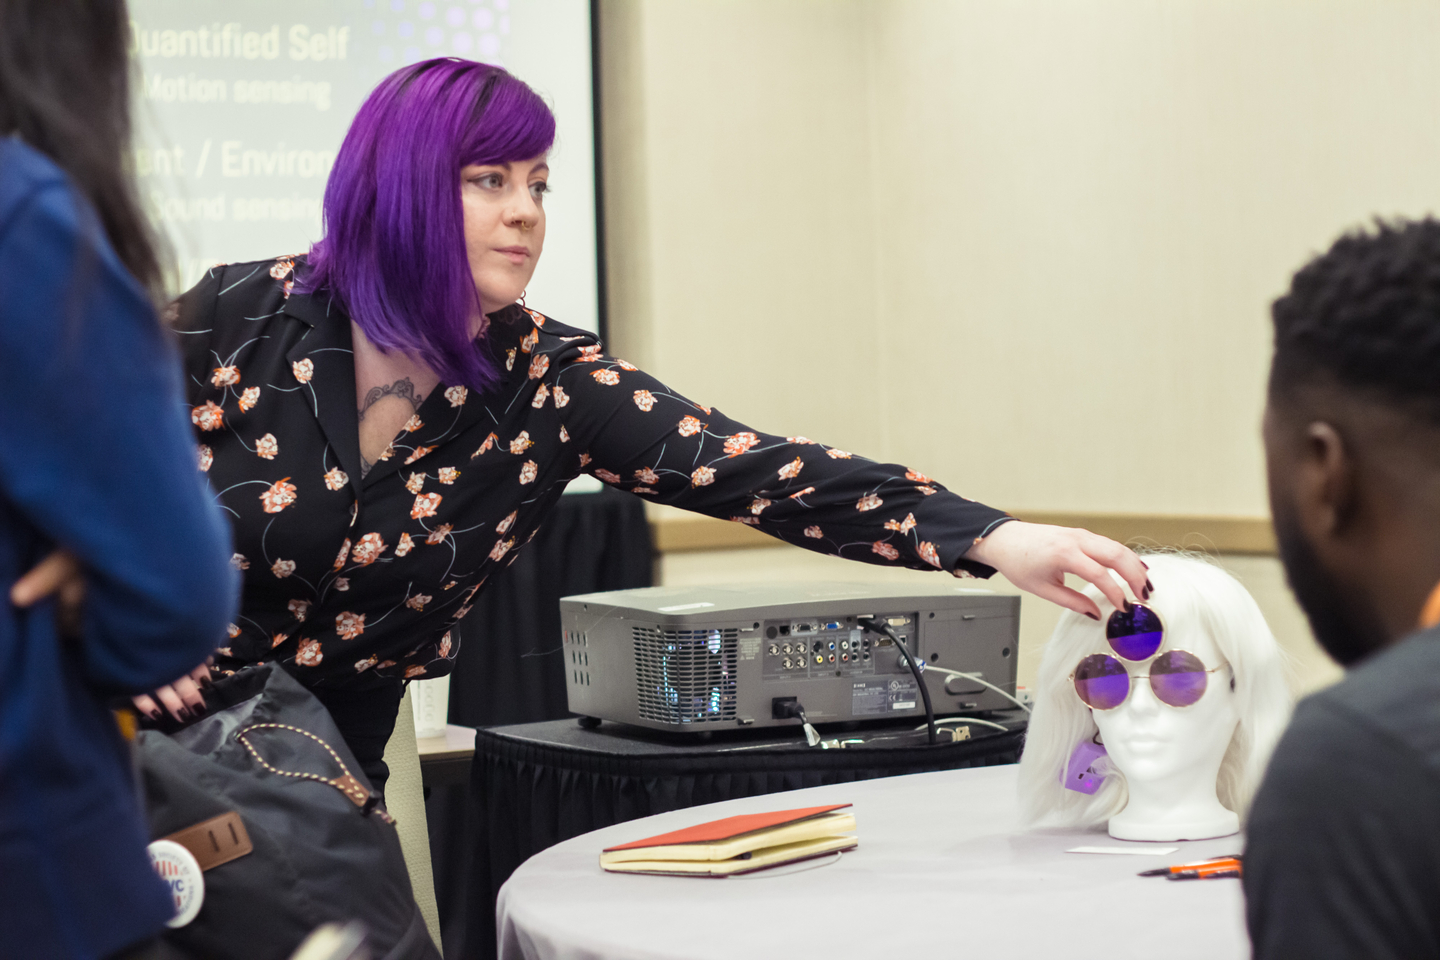 Angela Sheehan at the Fashion Hacking for Augmented Identity workshop – Photo by Holly Jee